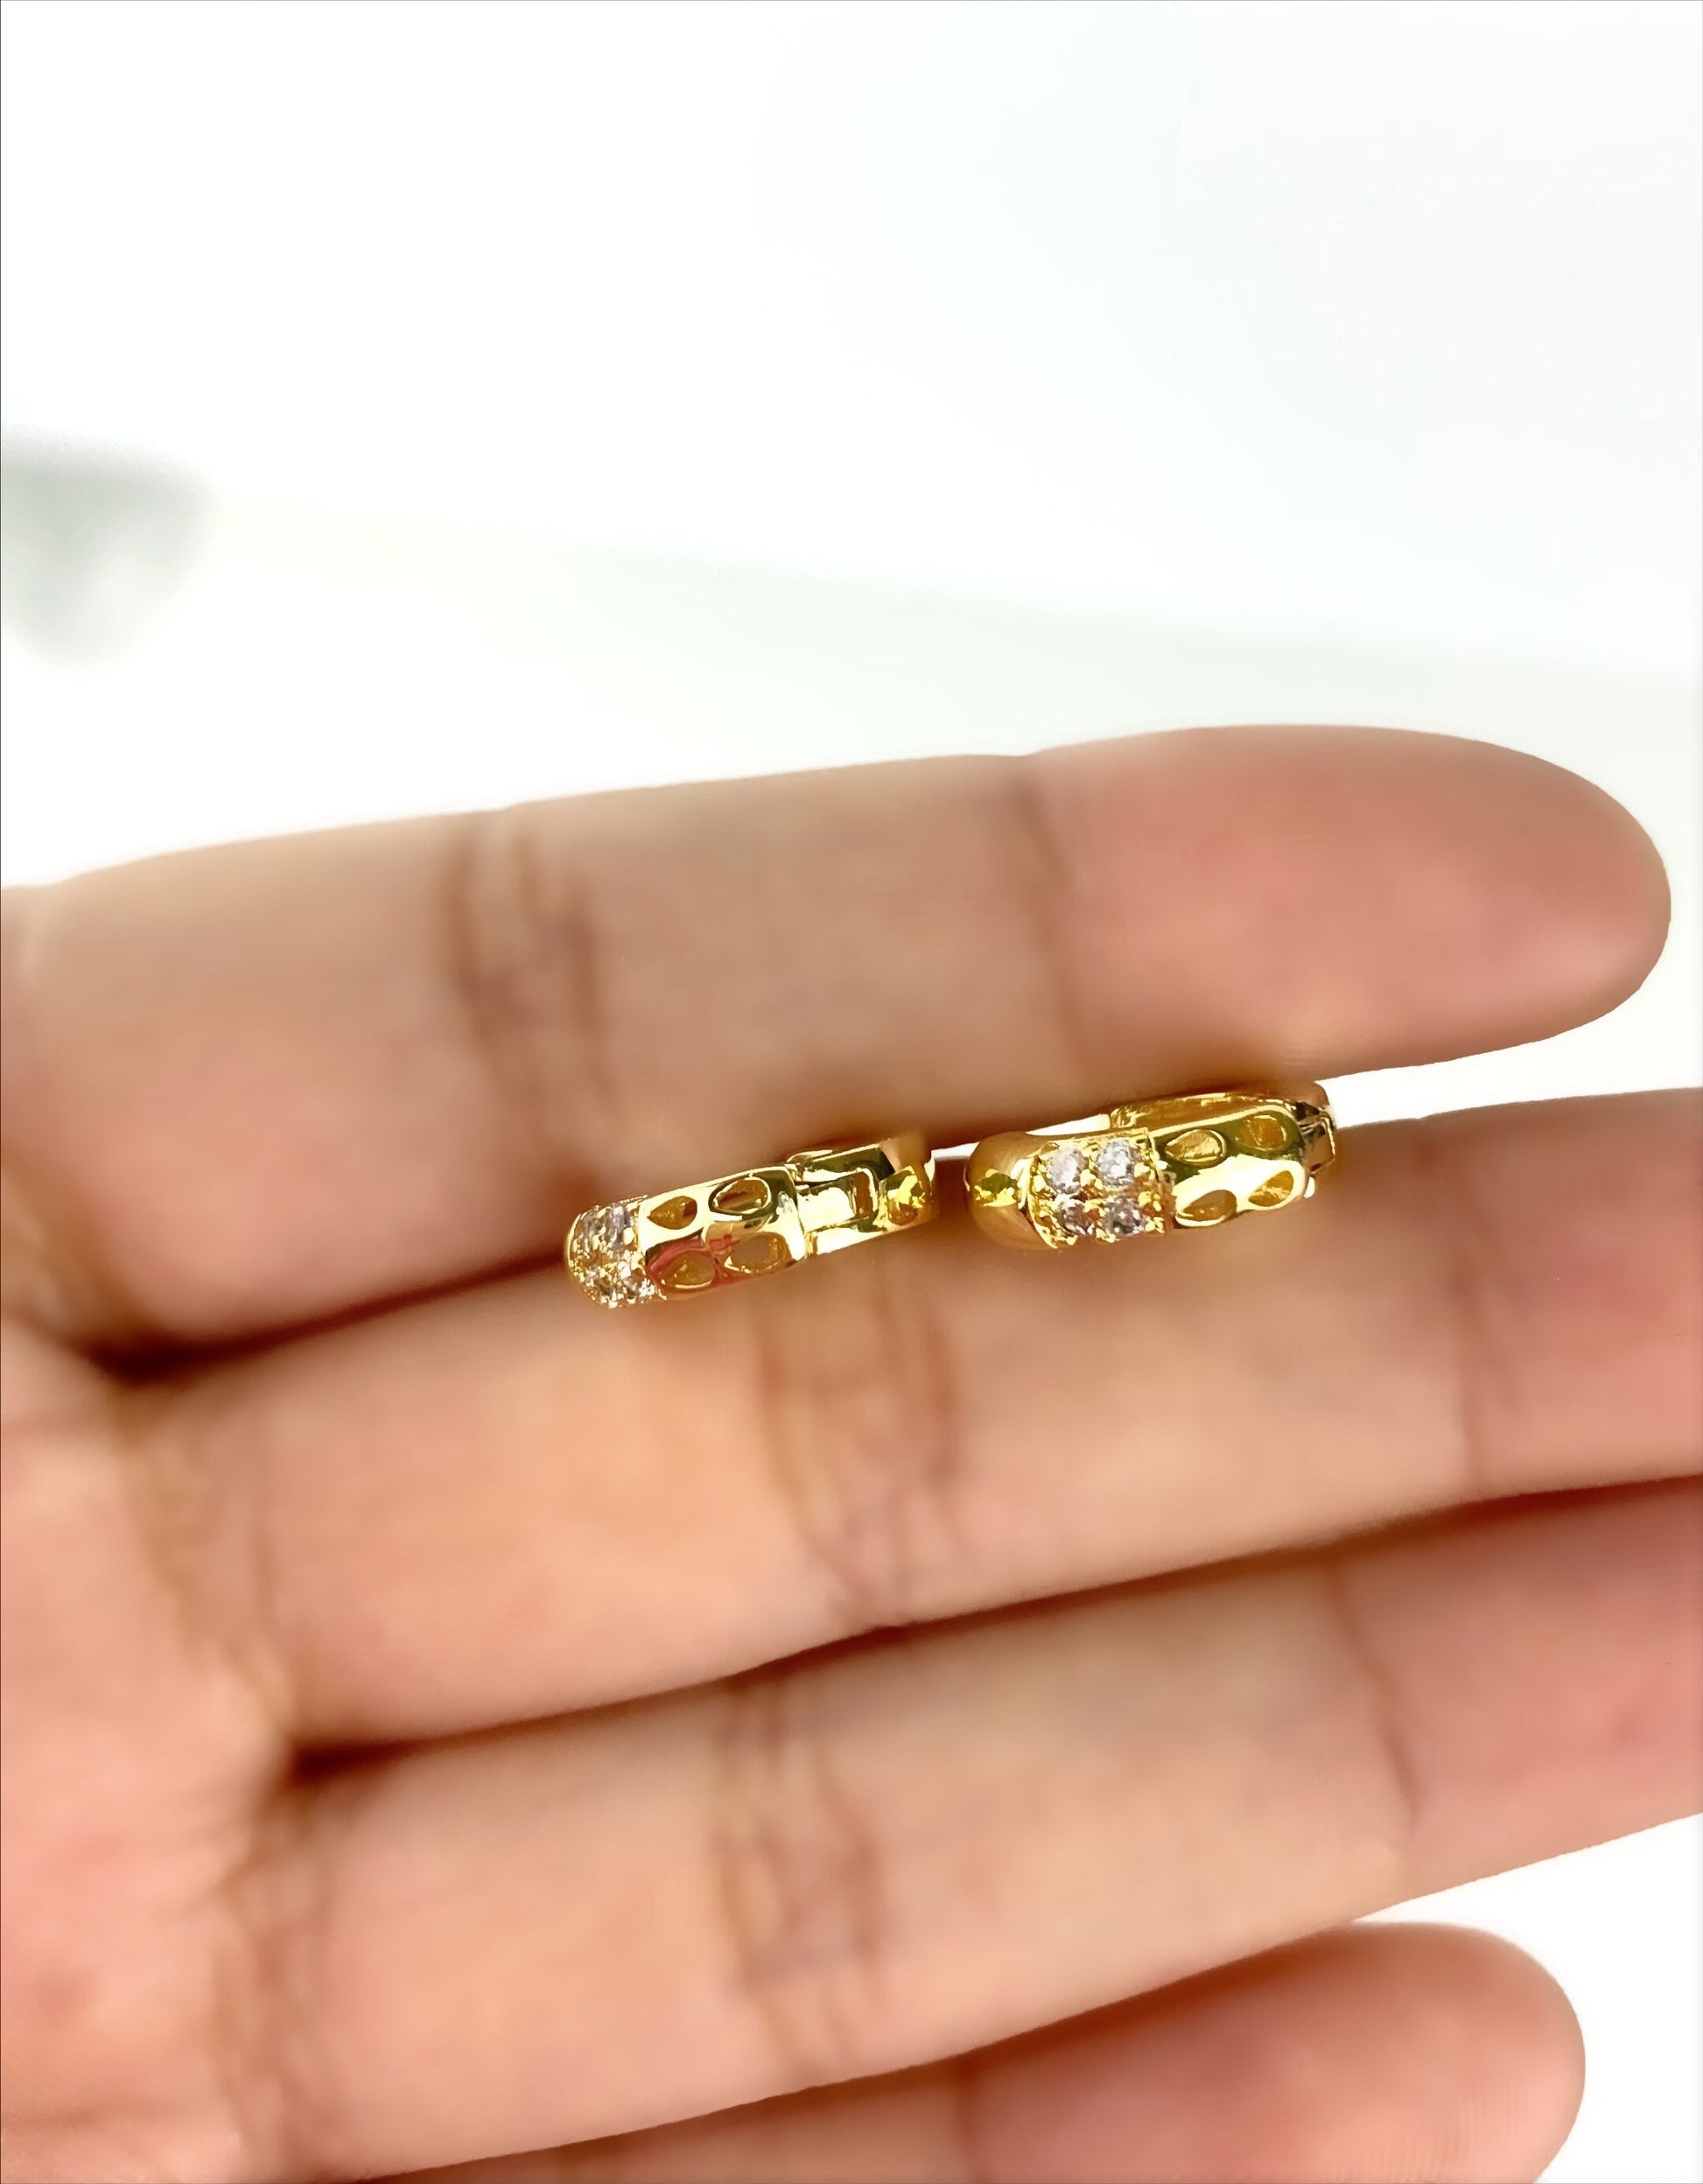 18k Gold Filled Four Cutout Teardrop with CZ Cubic Zirconia Small Huggie Hoops Earrings, Wholesale Jewelry Making Supplies